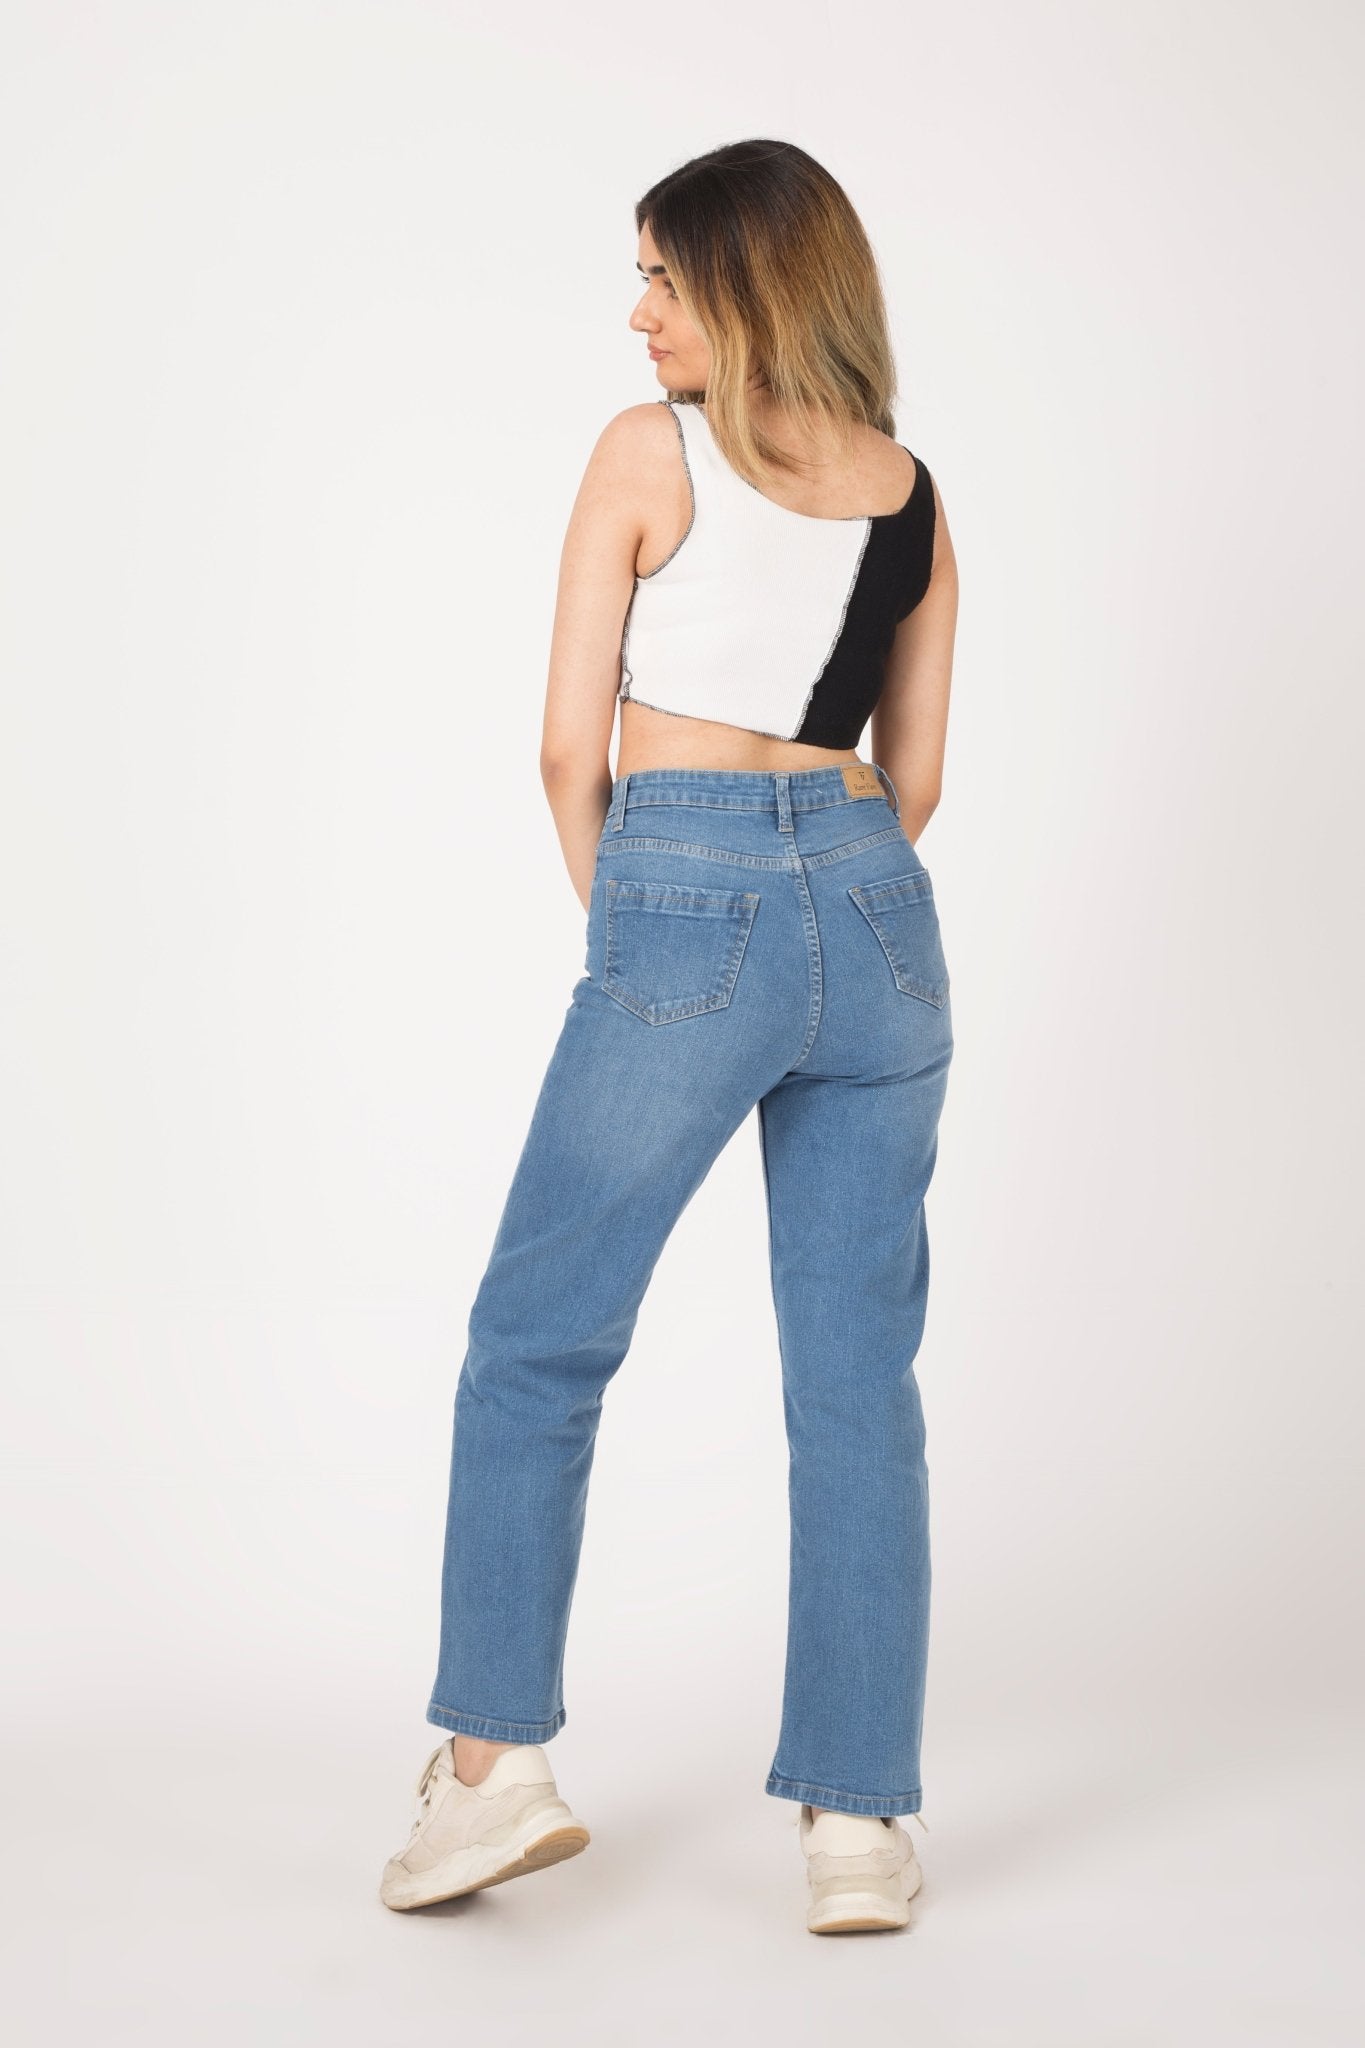 Buy MM-21 Light Blue Knitted Denim Straight Fit Jeans for Women at Amazon.in